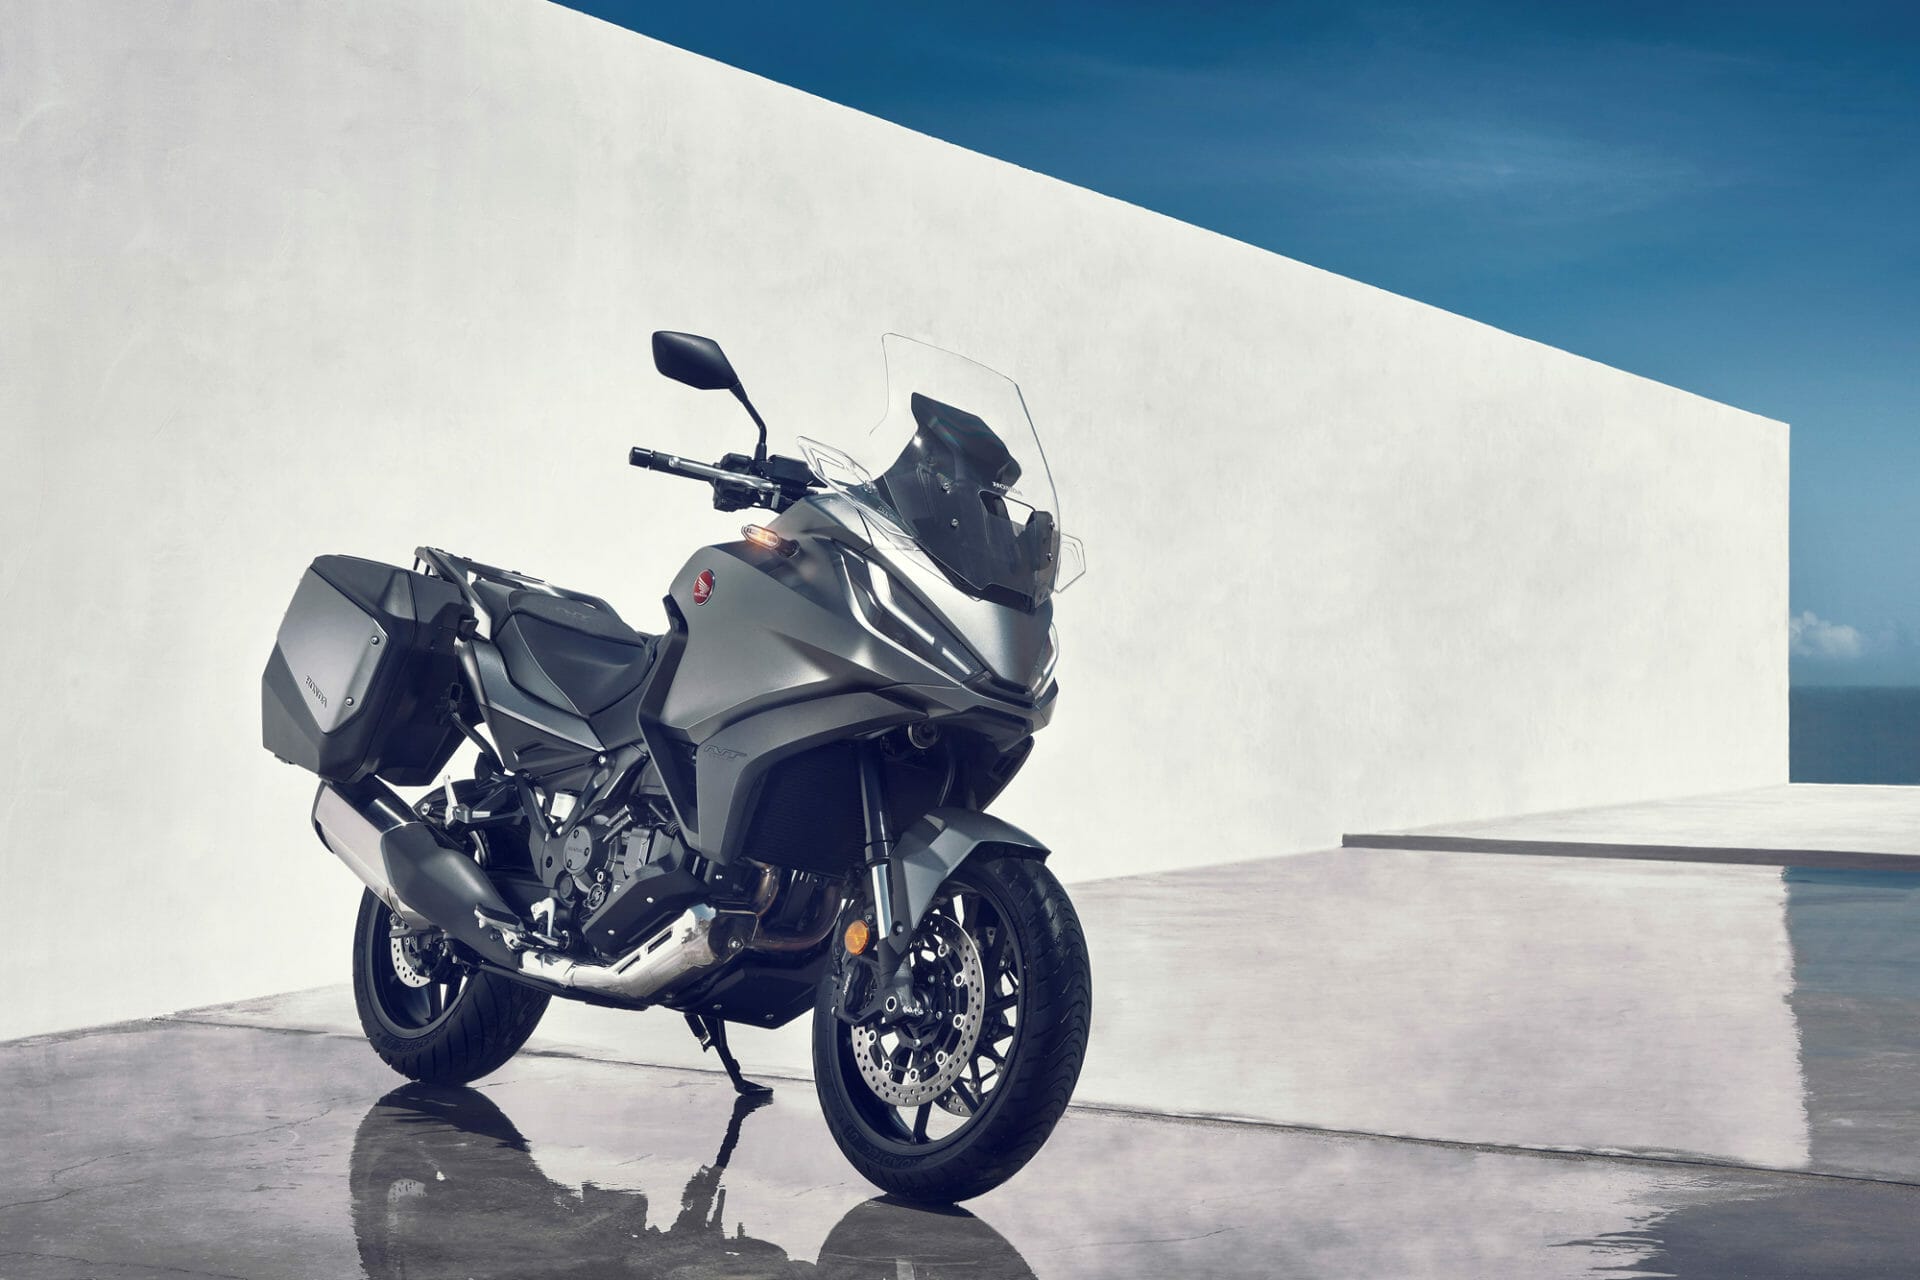 Honda NT1100
- also in the MOTORCYCLES.NEWS APP